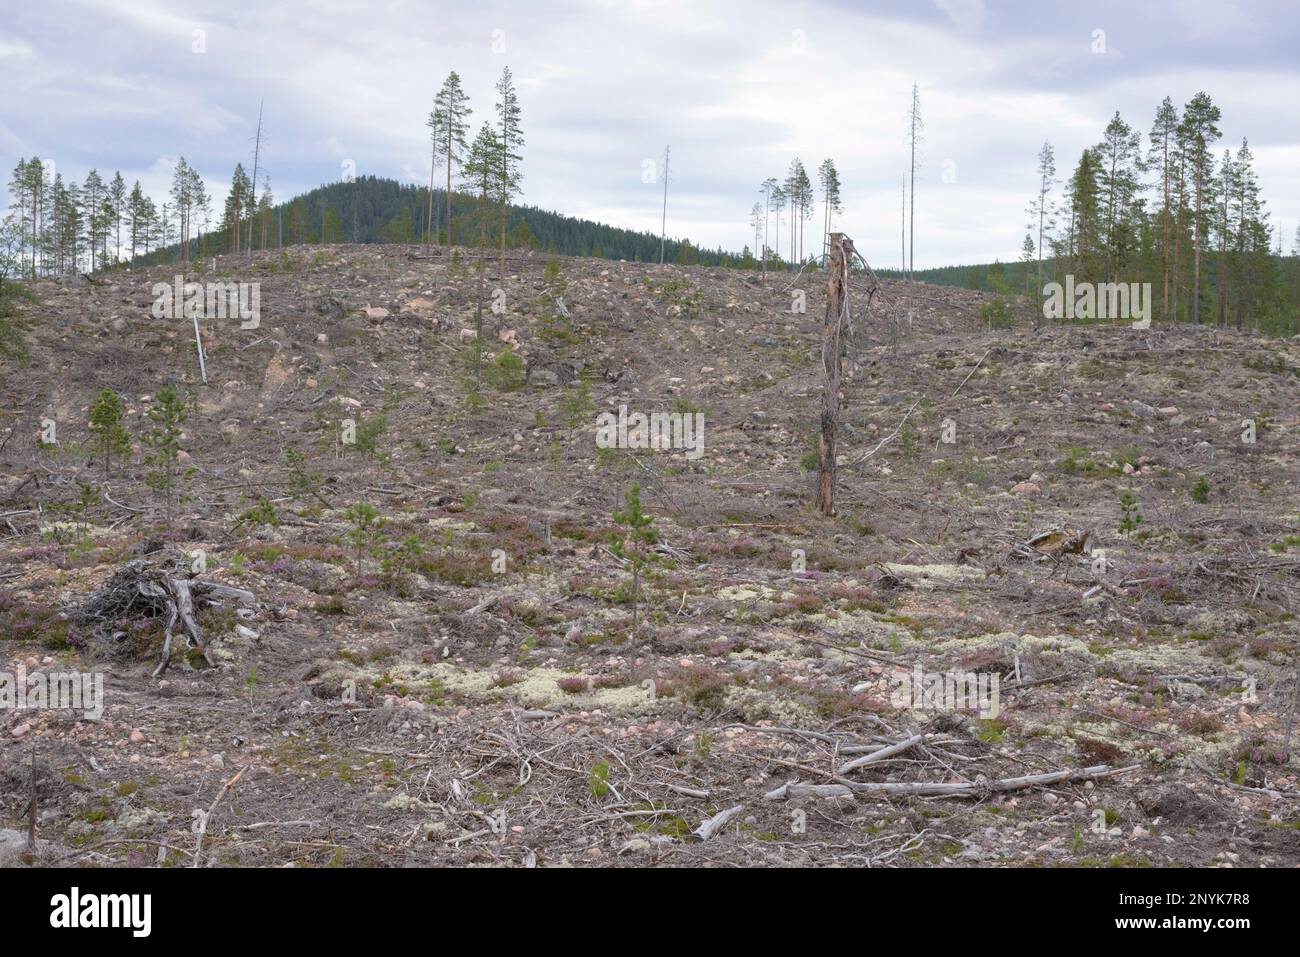 Jämtland / Sweden - Large clearcut in native forest. Sweden praises its 'forestry model' as sustainable, but scientists and NGOs object this. Stock Photo